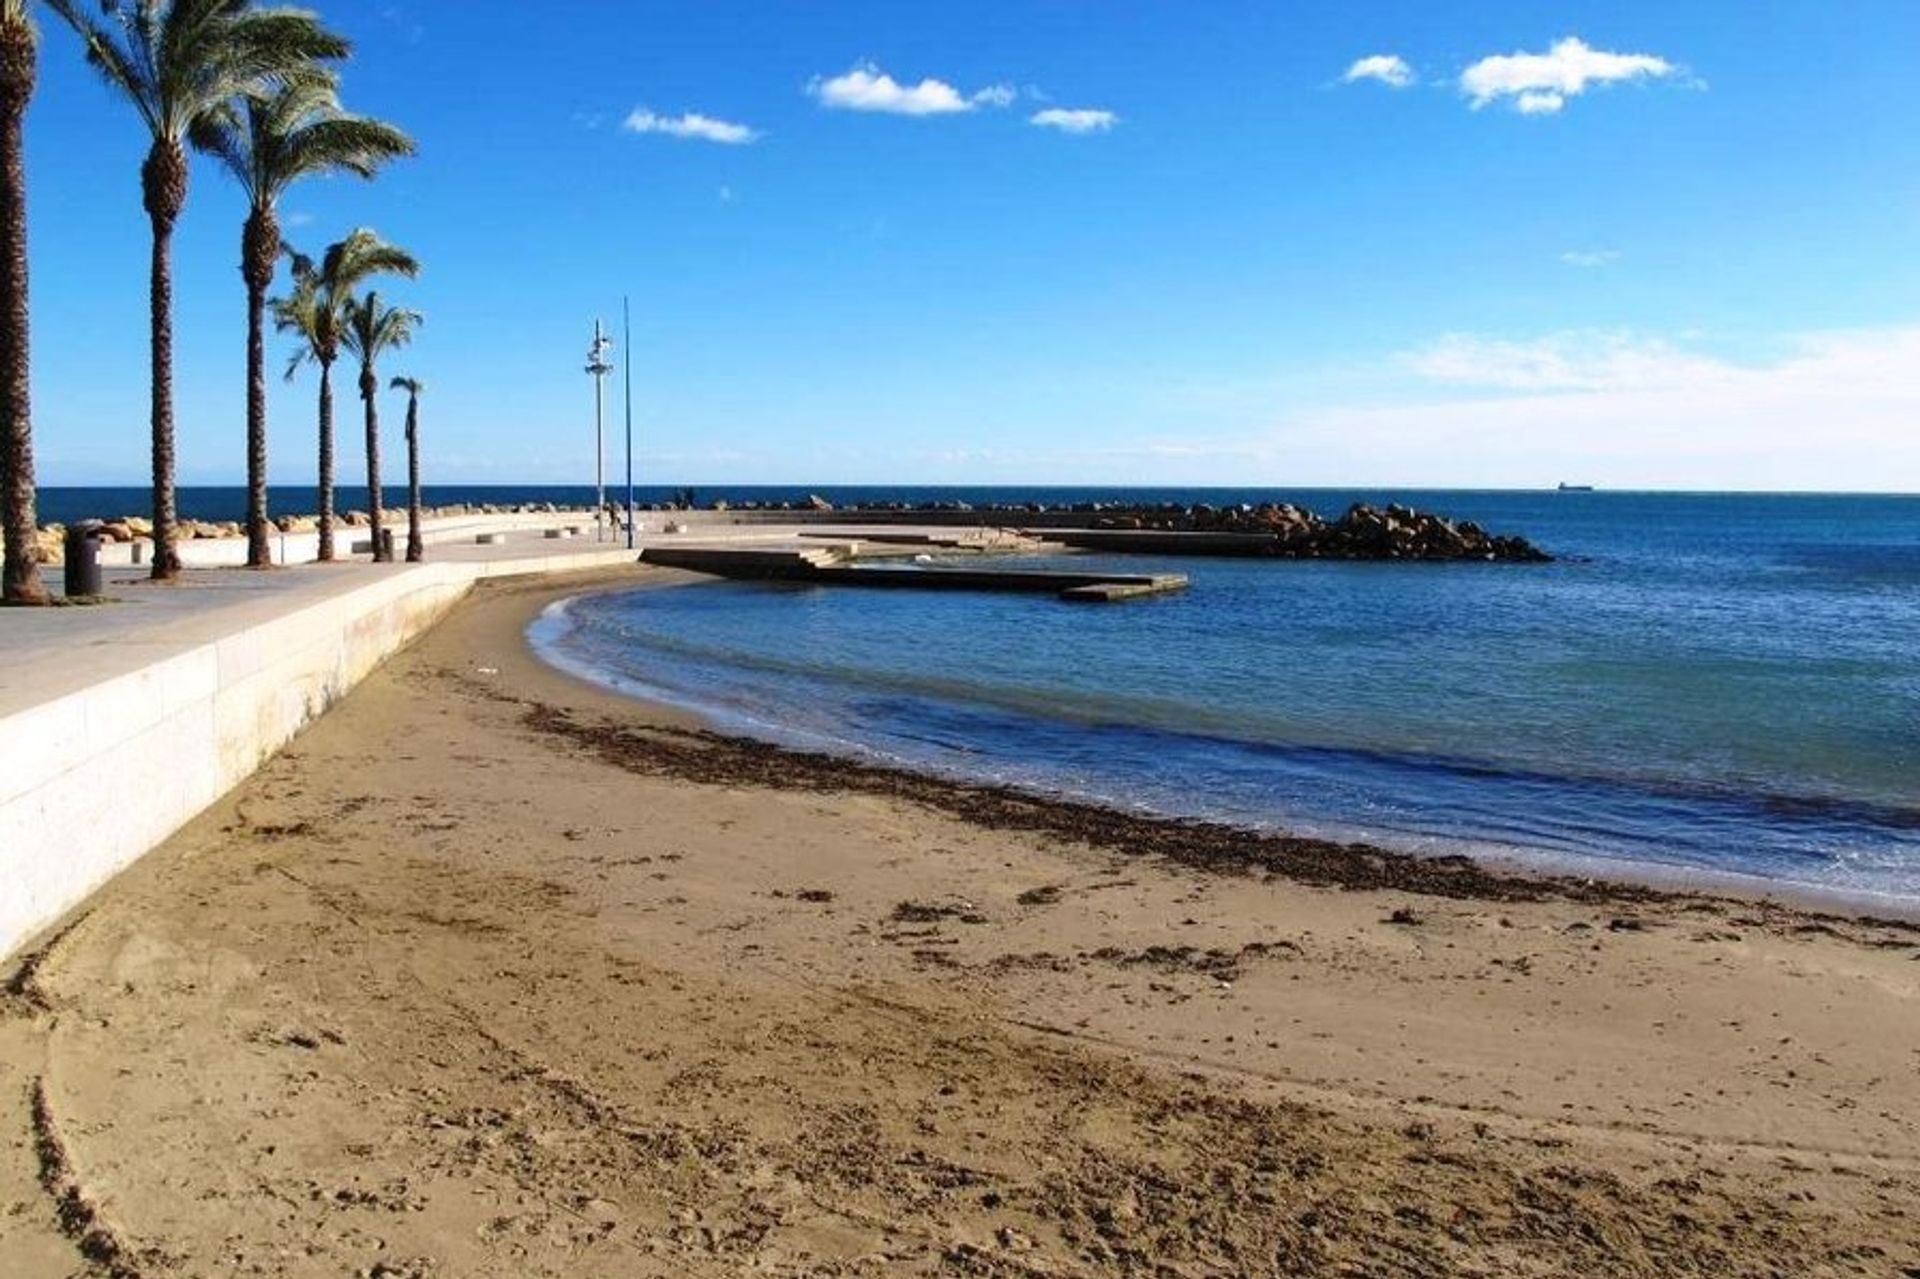 Take a relaxing afternoon stroll along La Zenia's beach promenade after a long day in the sun